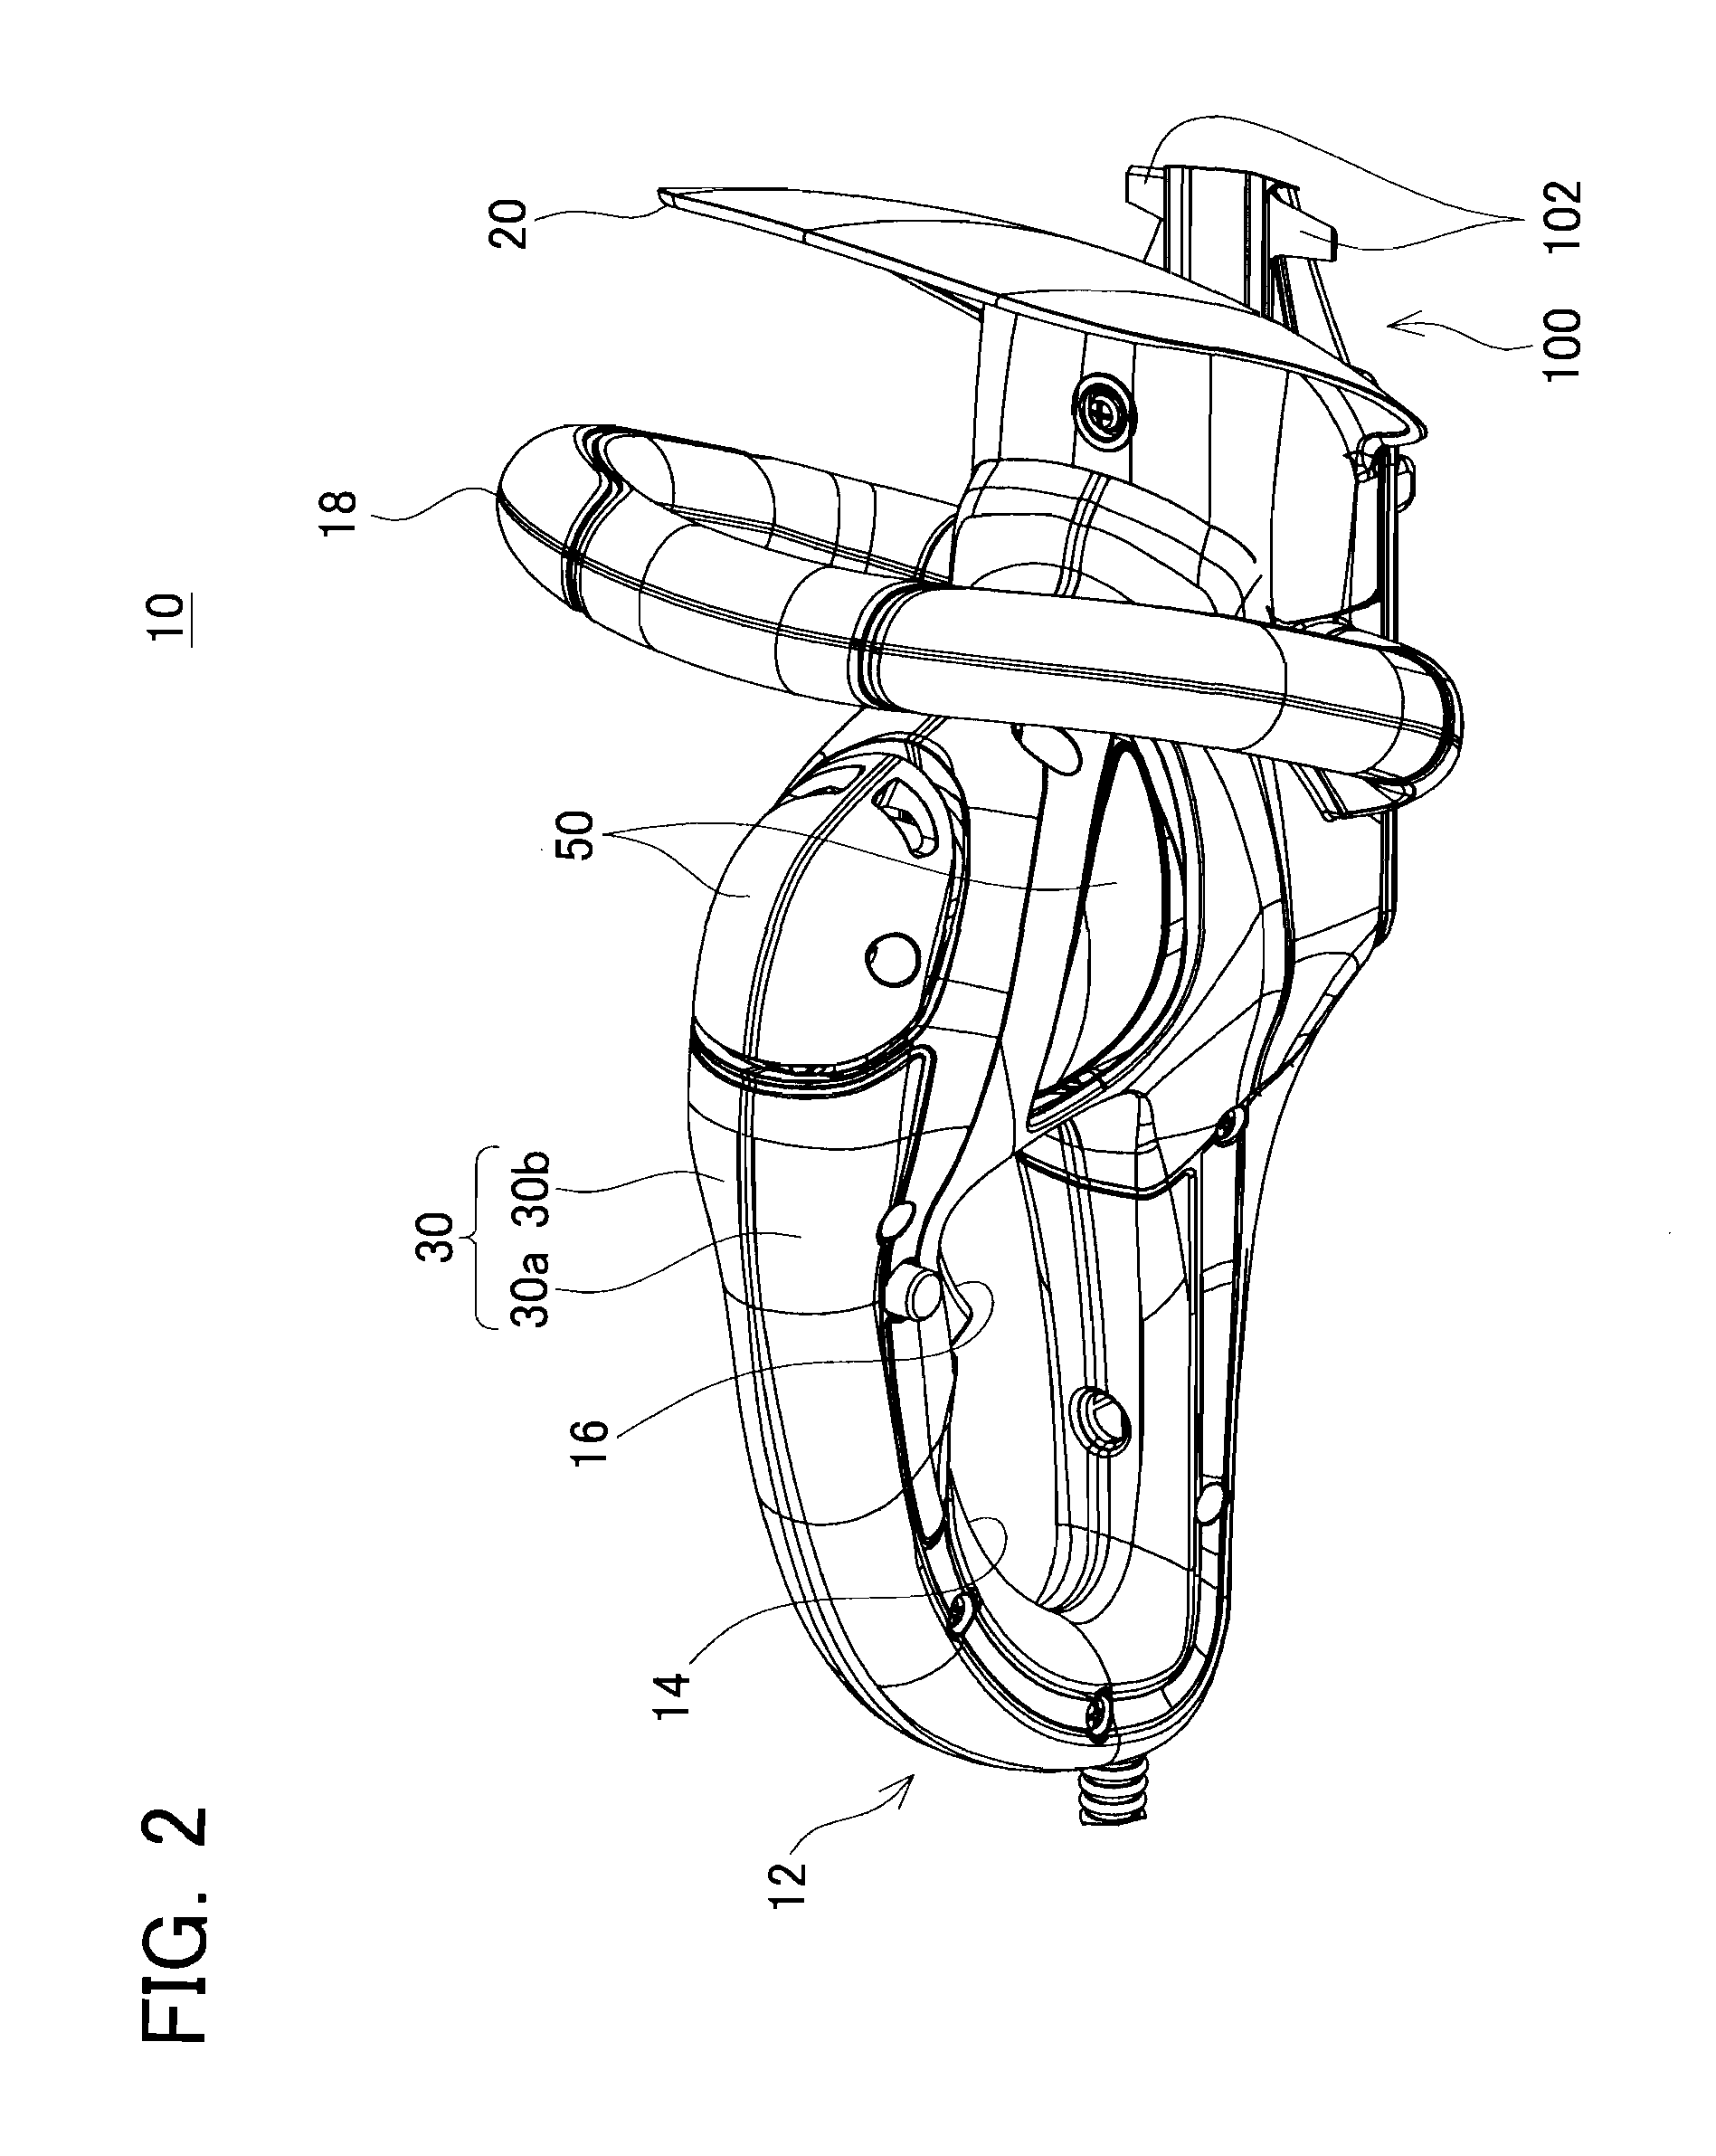 Power tool with vibration dampening